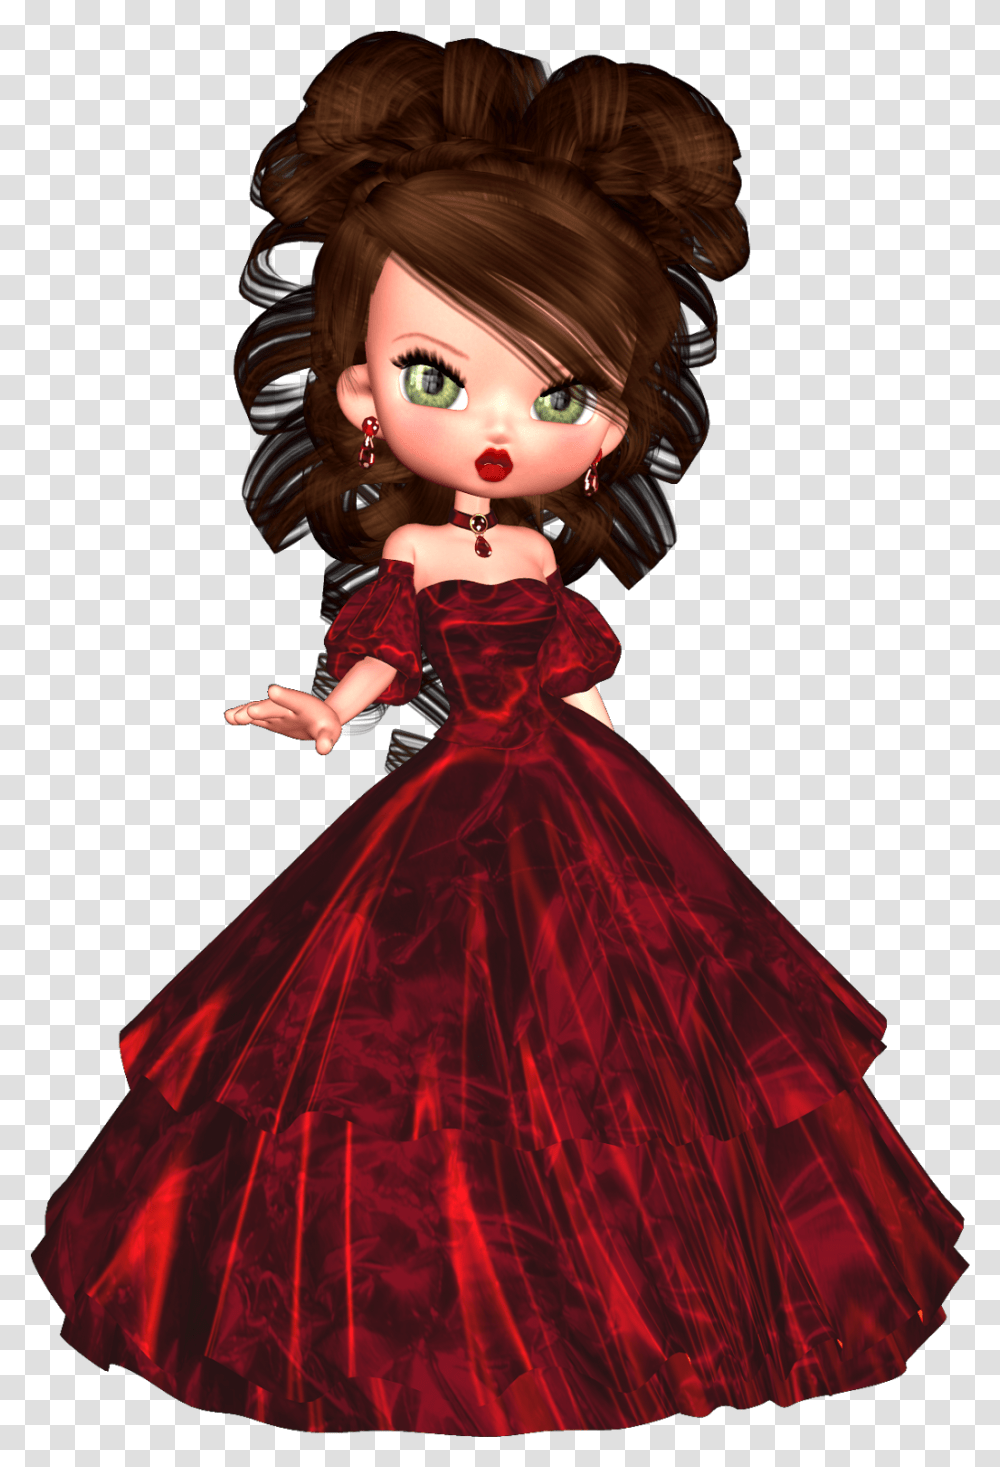 Explore Beautiful Dolls Baby Dolls And More Doll, Toy, Wedding Gown, Robe, Fashion Transparent Png